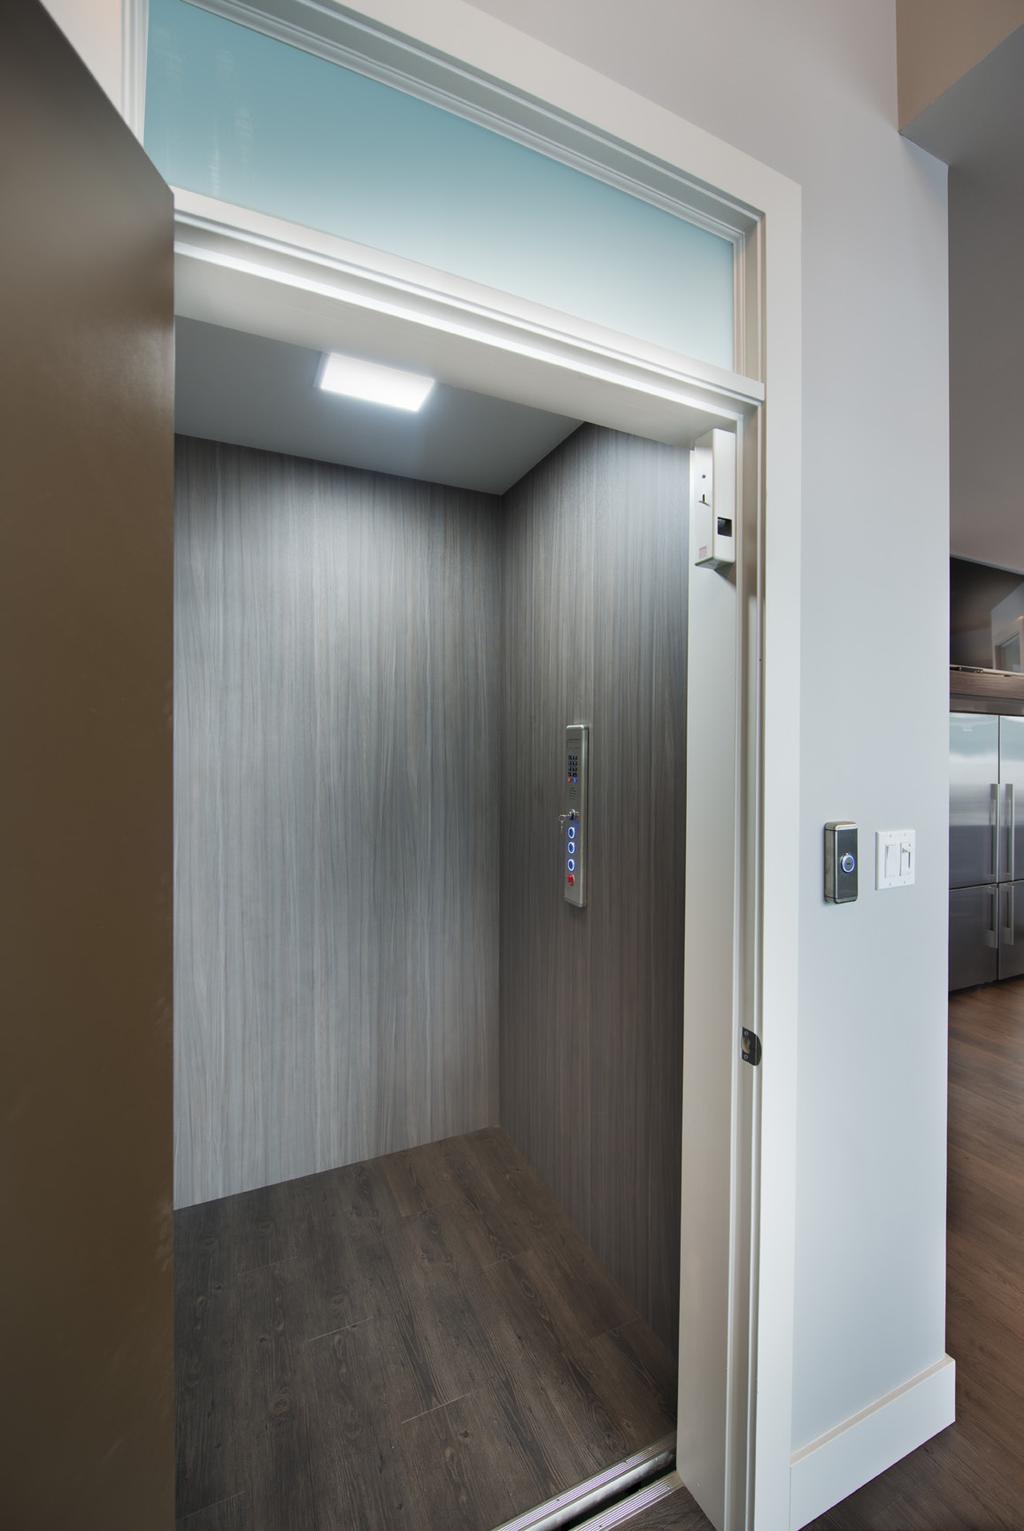 PRODUCT LINES CUSTOM Our Custom line of Hybrid Elevators offers functional, affordable, accessibility solutions at a competitive price.